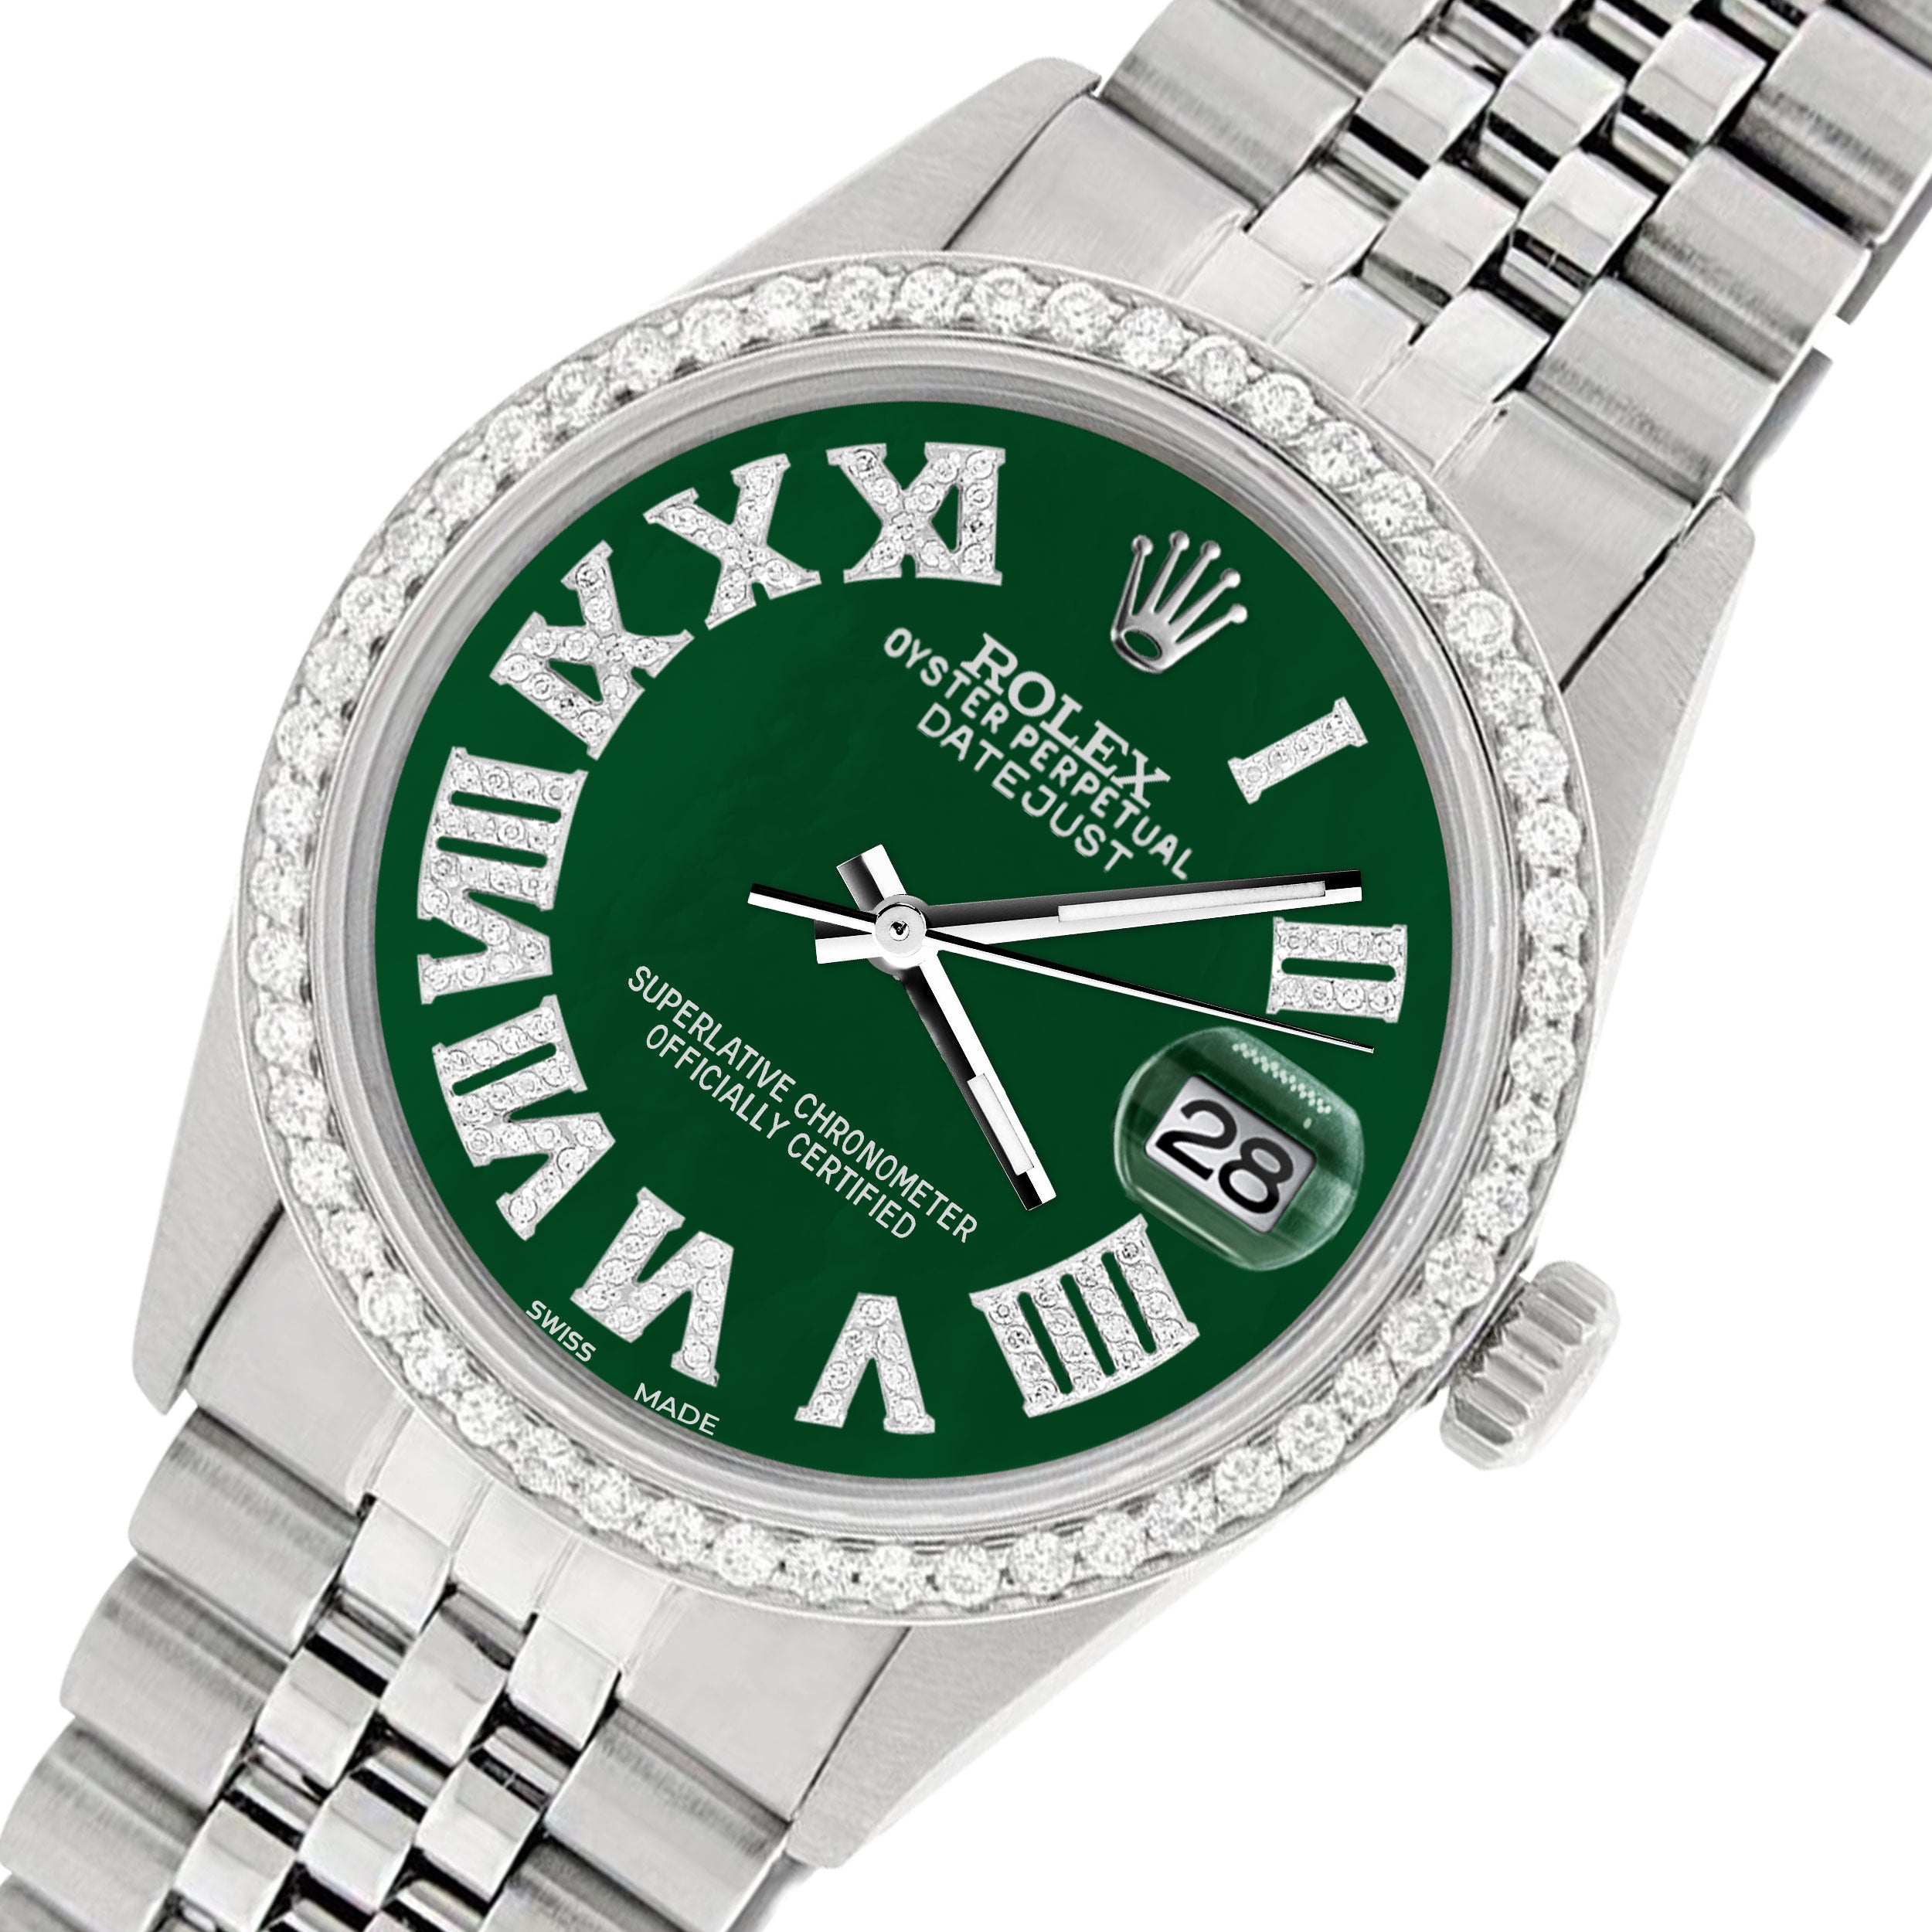 Serial number rotary watch prices